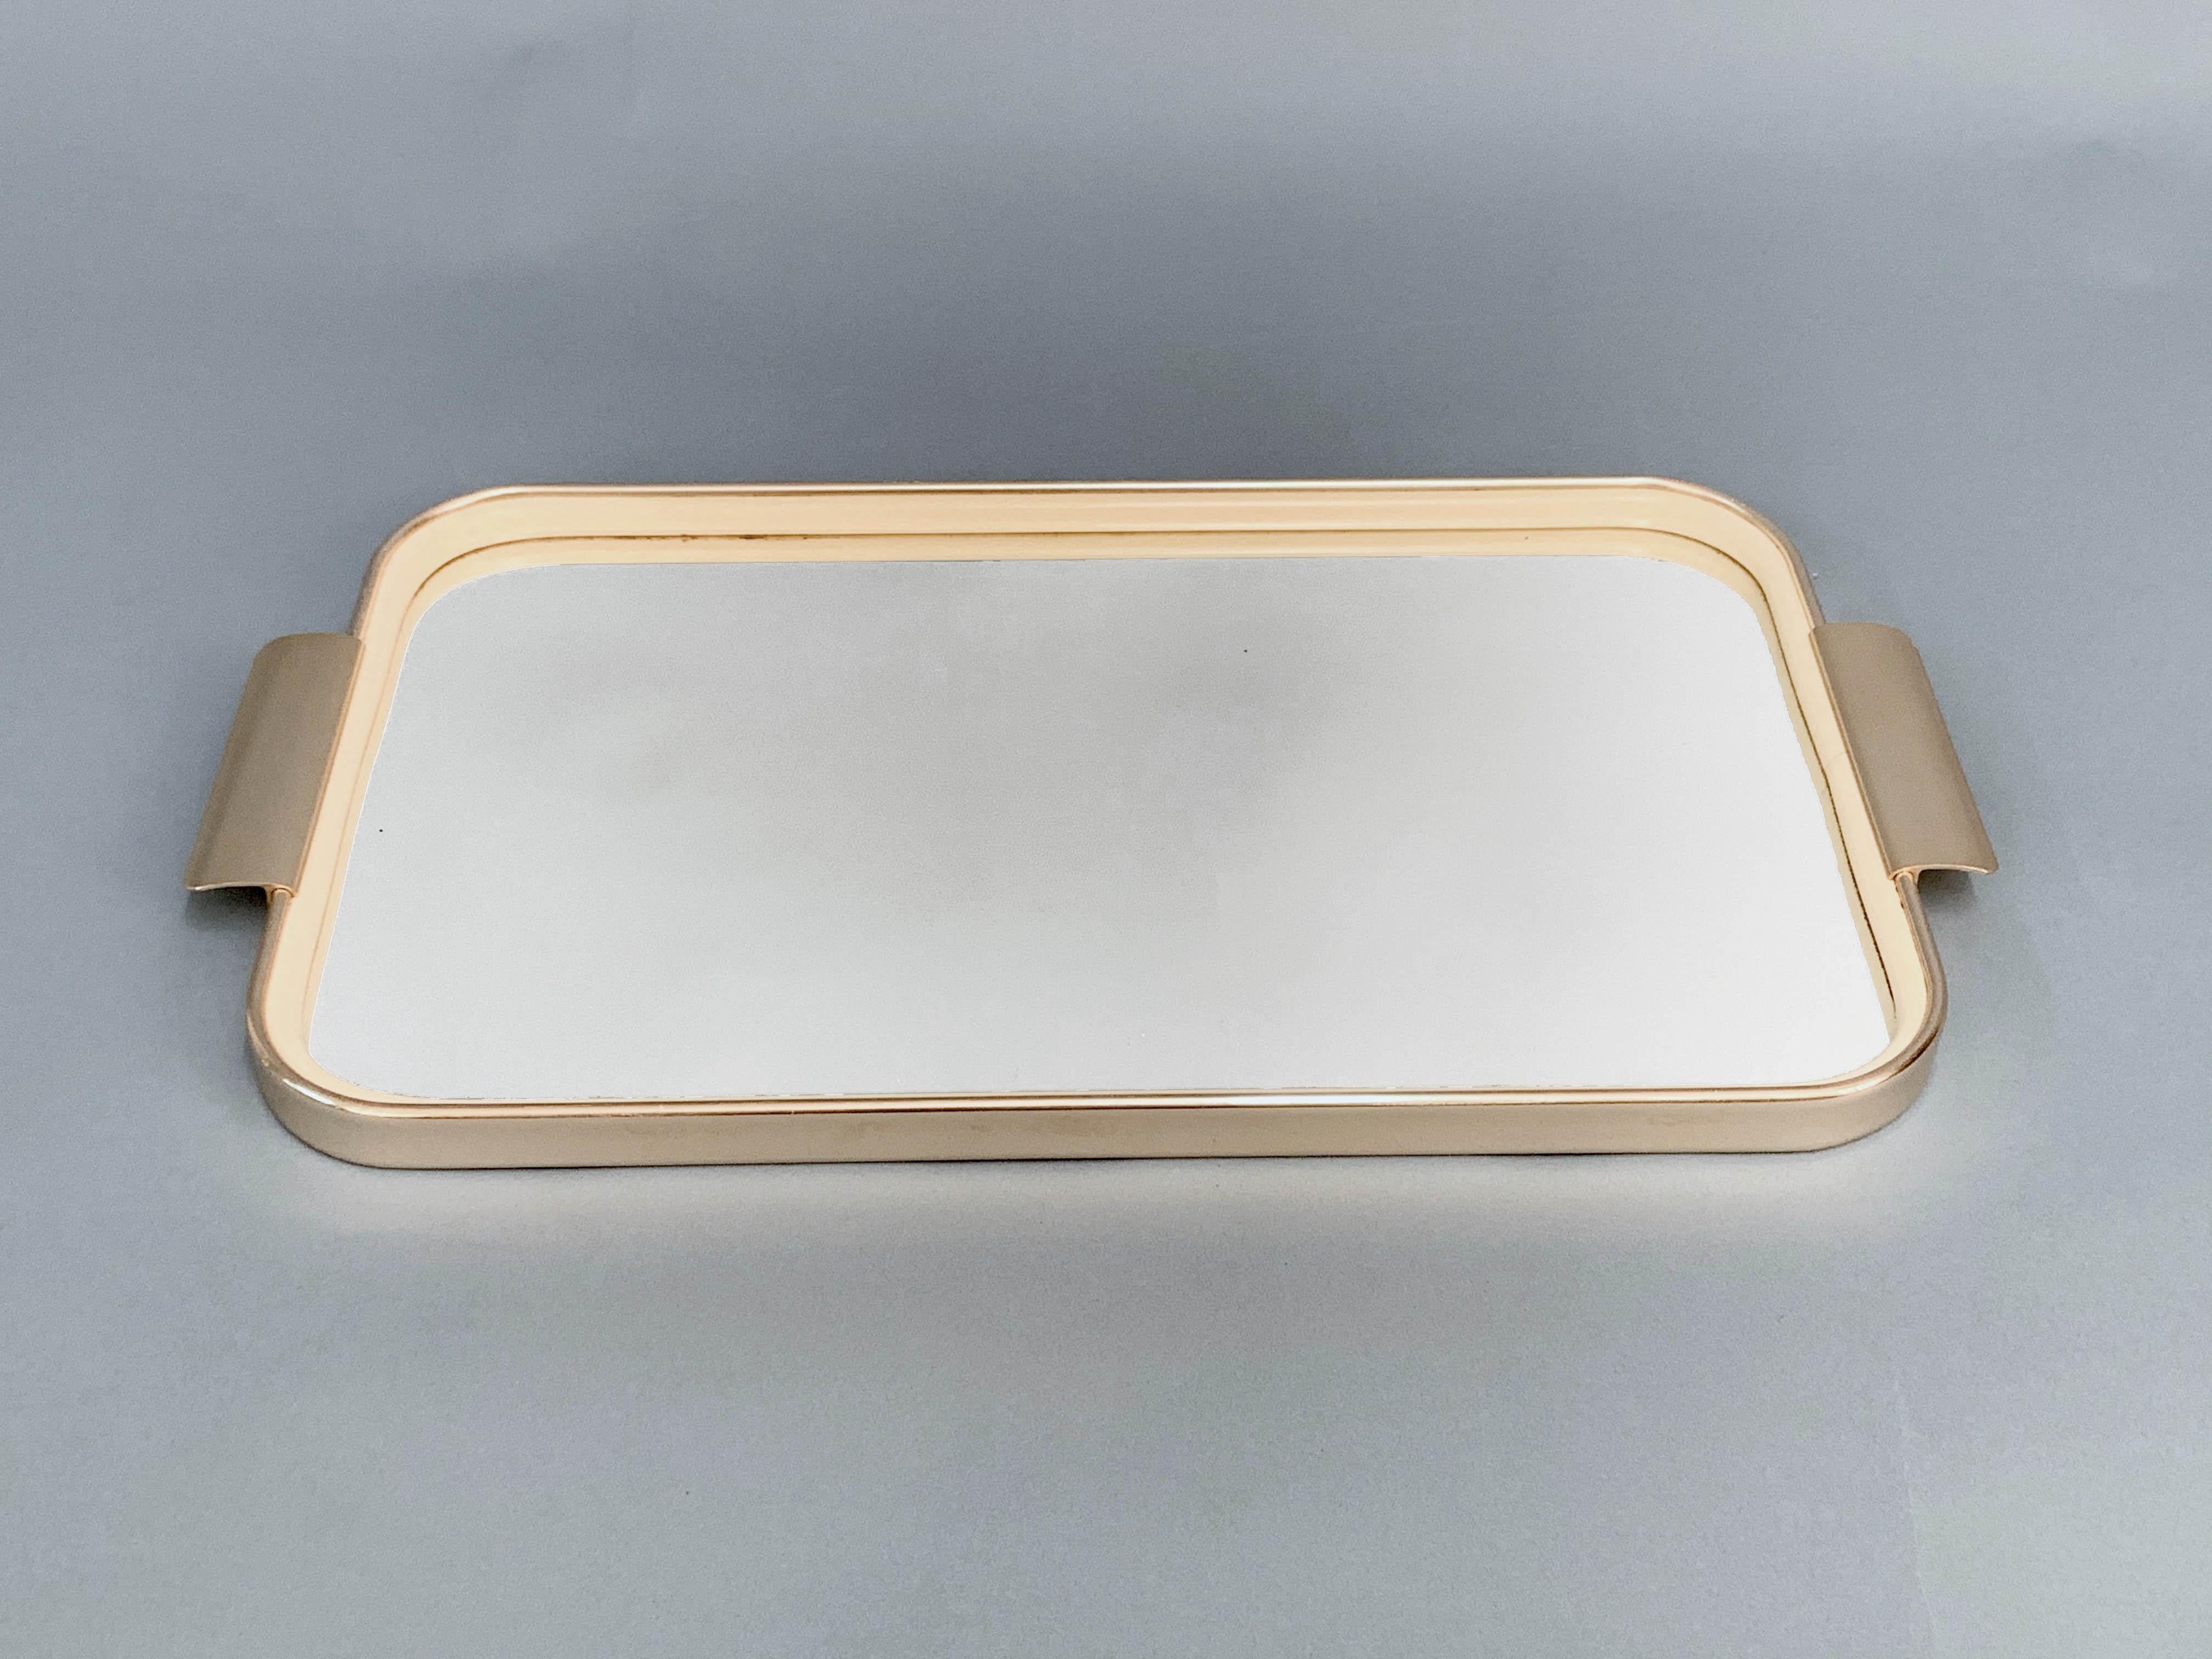 Elegant midcentury gilt aluminum serving tray with mirror top, 1960s. This astonishing piece of barware was designed by Carlo Scarpa in Italy during 1960s.

This item is wonderful because of the perfect fusion of the materials: gilt anodized